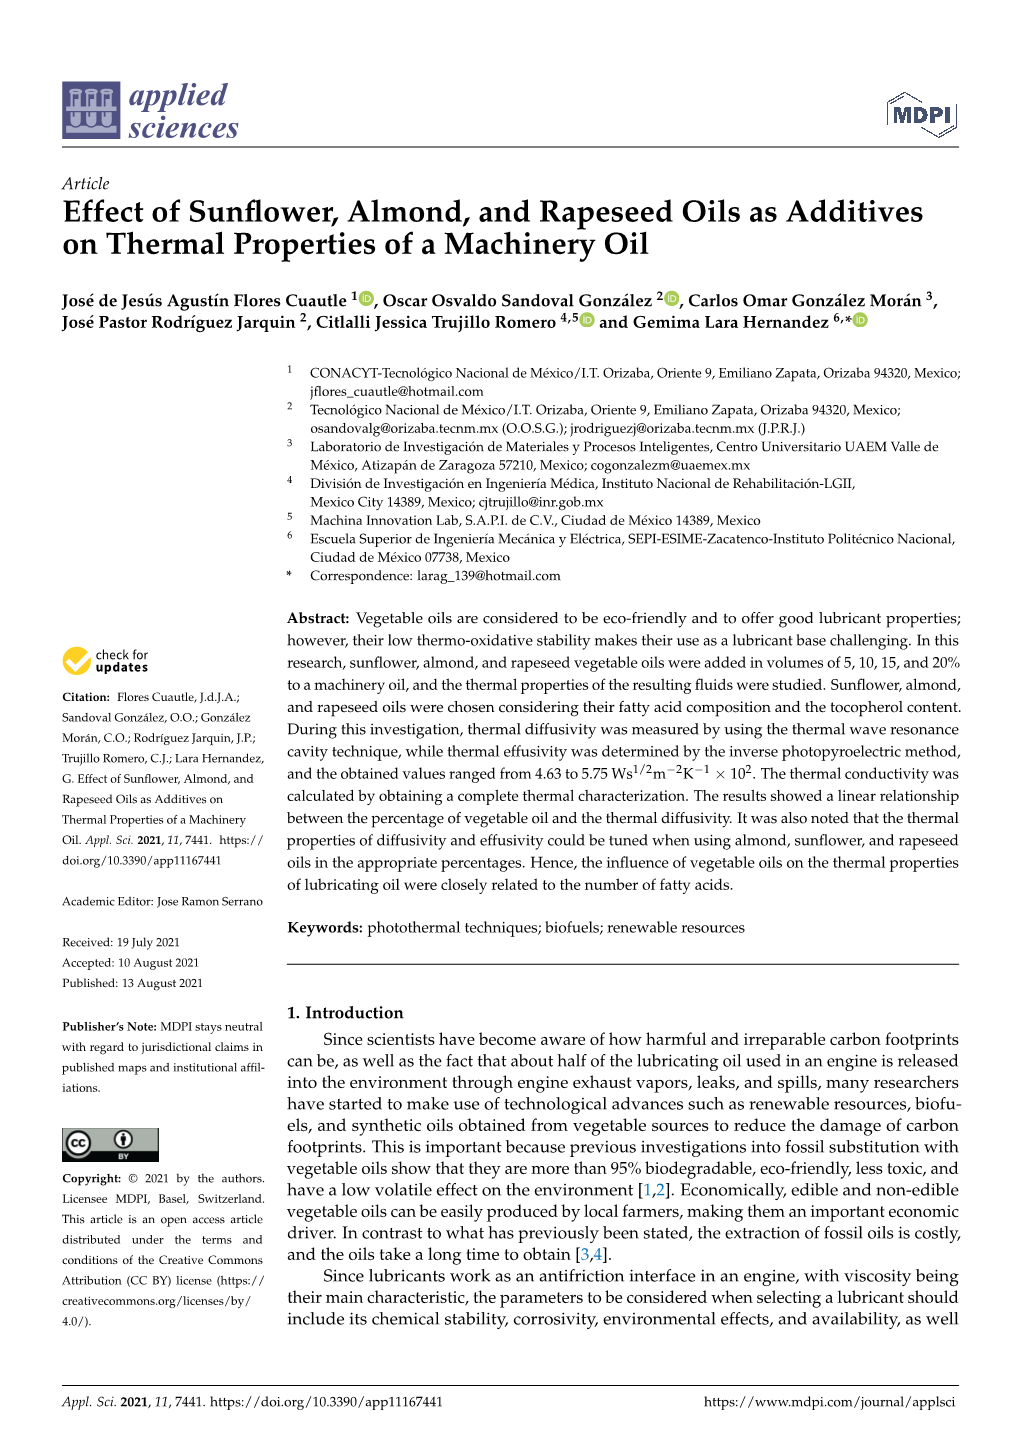 Effect of Sunflower, Almond, and Rapeseed Oils As Additives